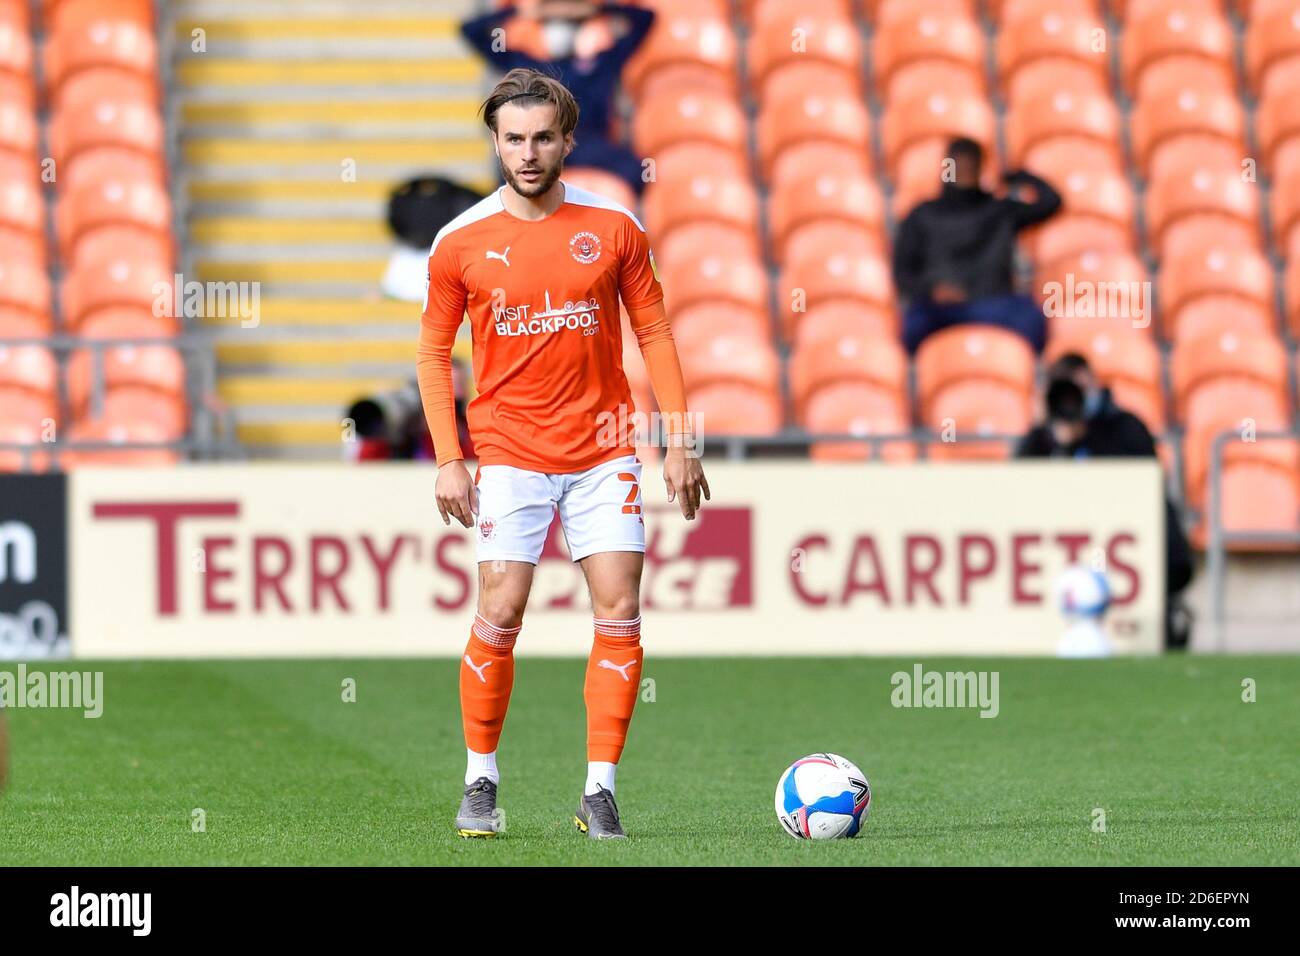 Luke Garbutt (29) of Blackpool with the ball Stock Photo